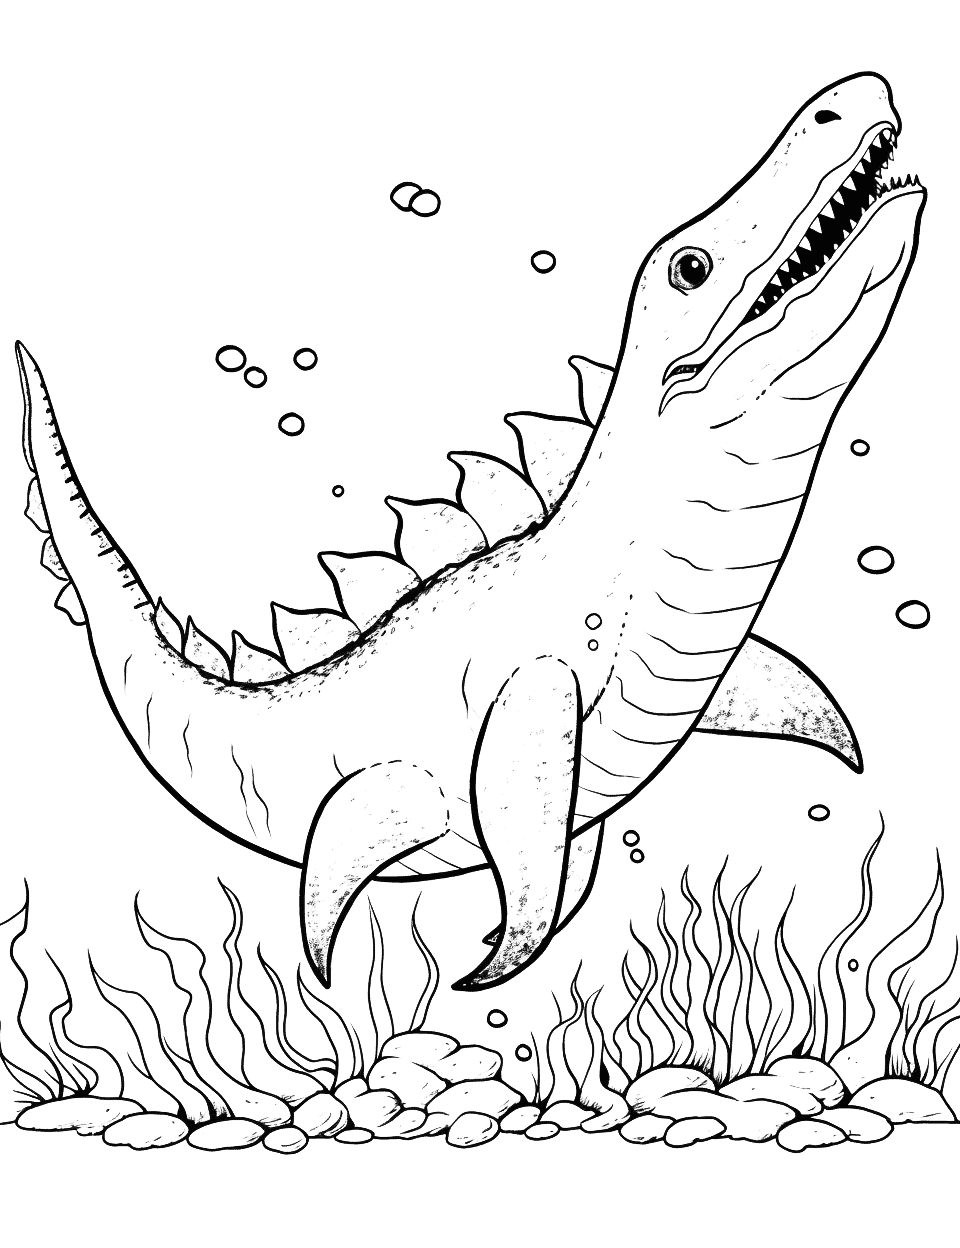 Mighty Mosasaurus Dinosaur Coloring Page - The underwater Mosasaurus chasing fish in the deep sea.